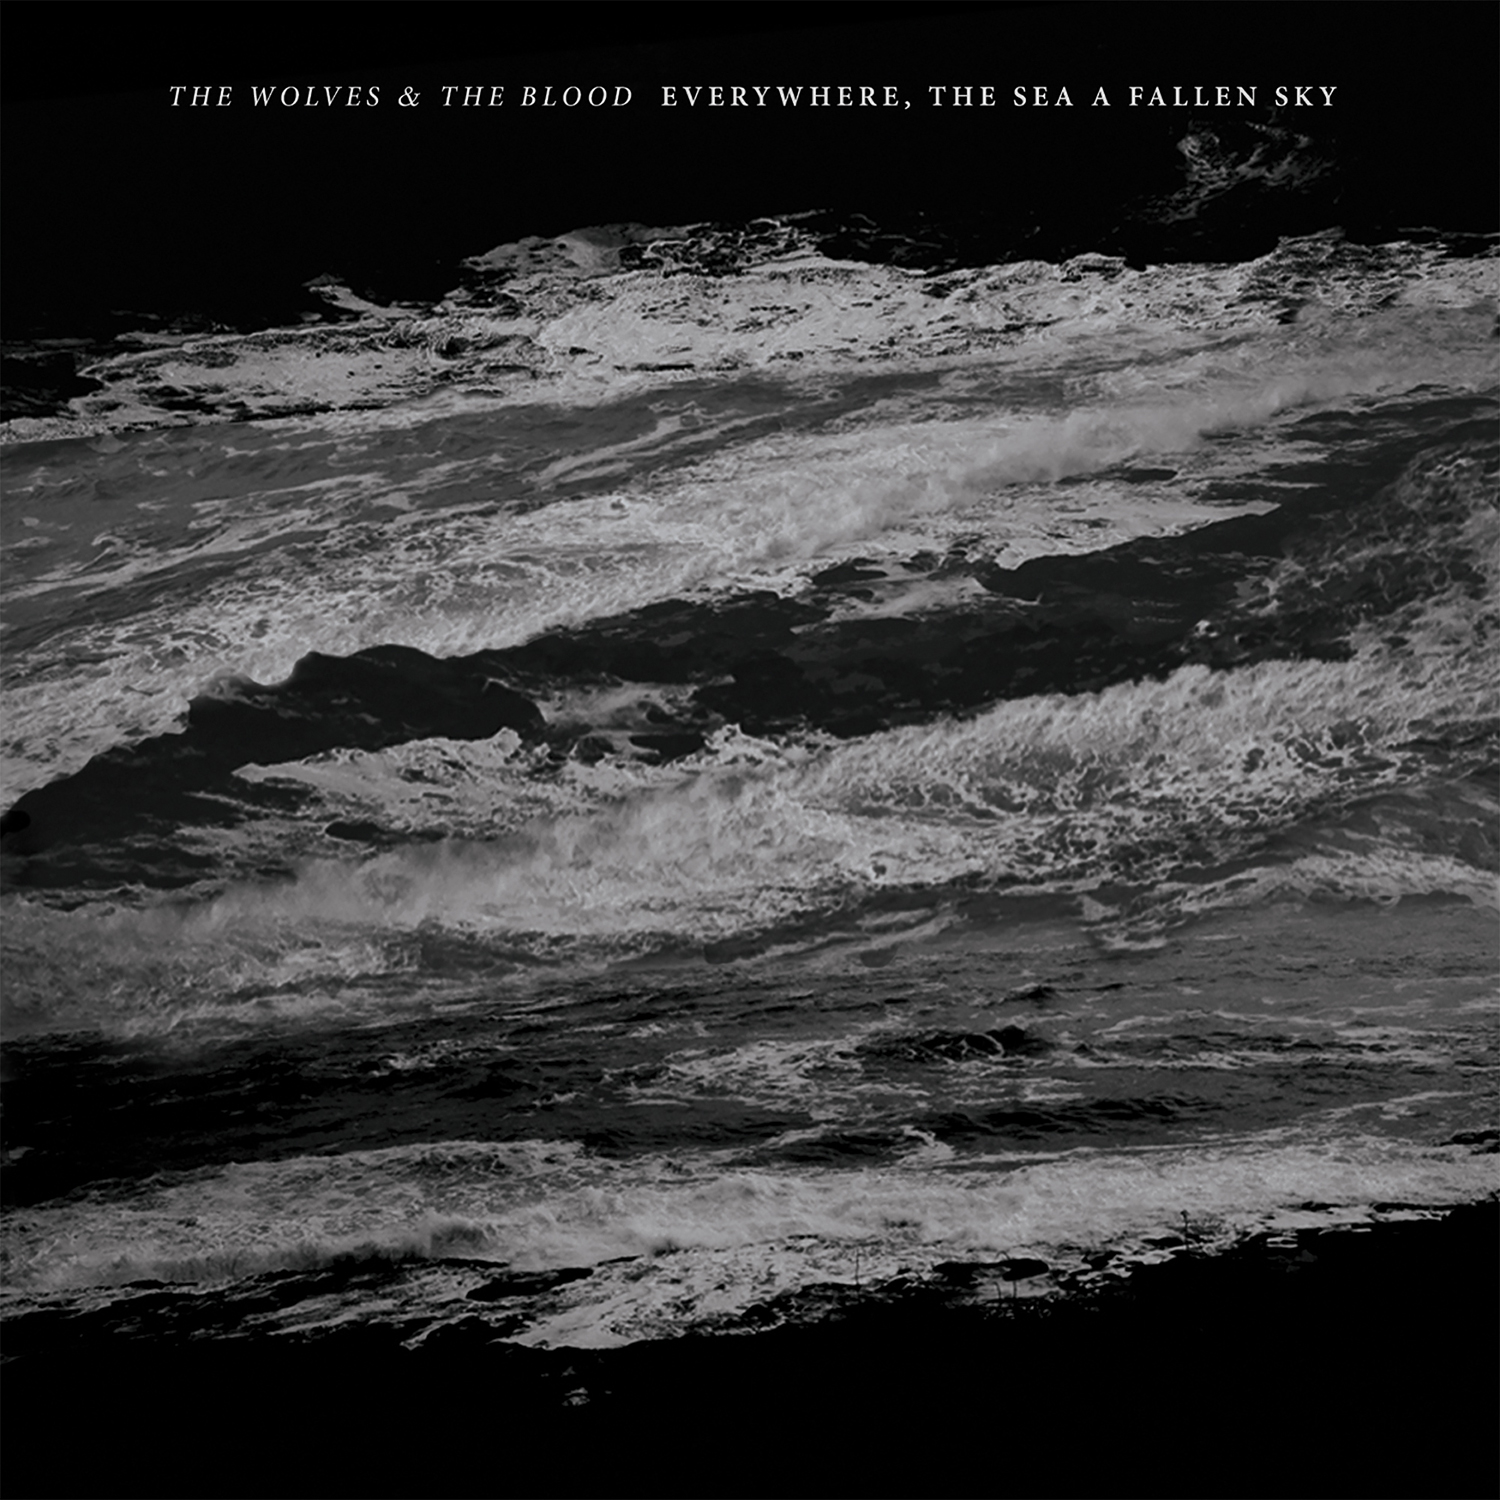 THE WOLVES & THE BLOOD 'EVERYWHERE, THE SEA A FALLEN SKY'